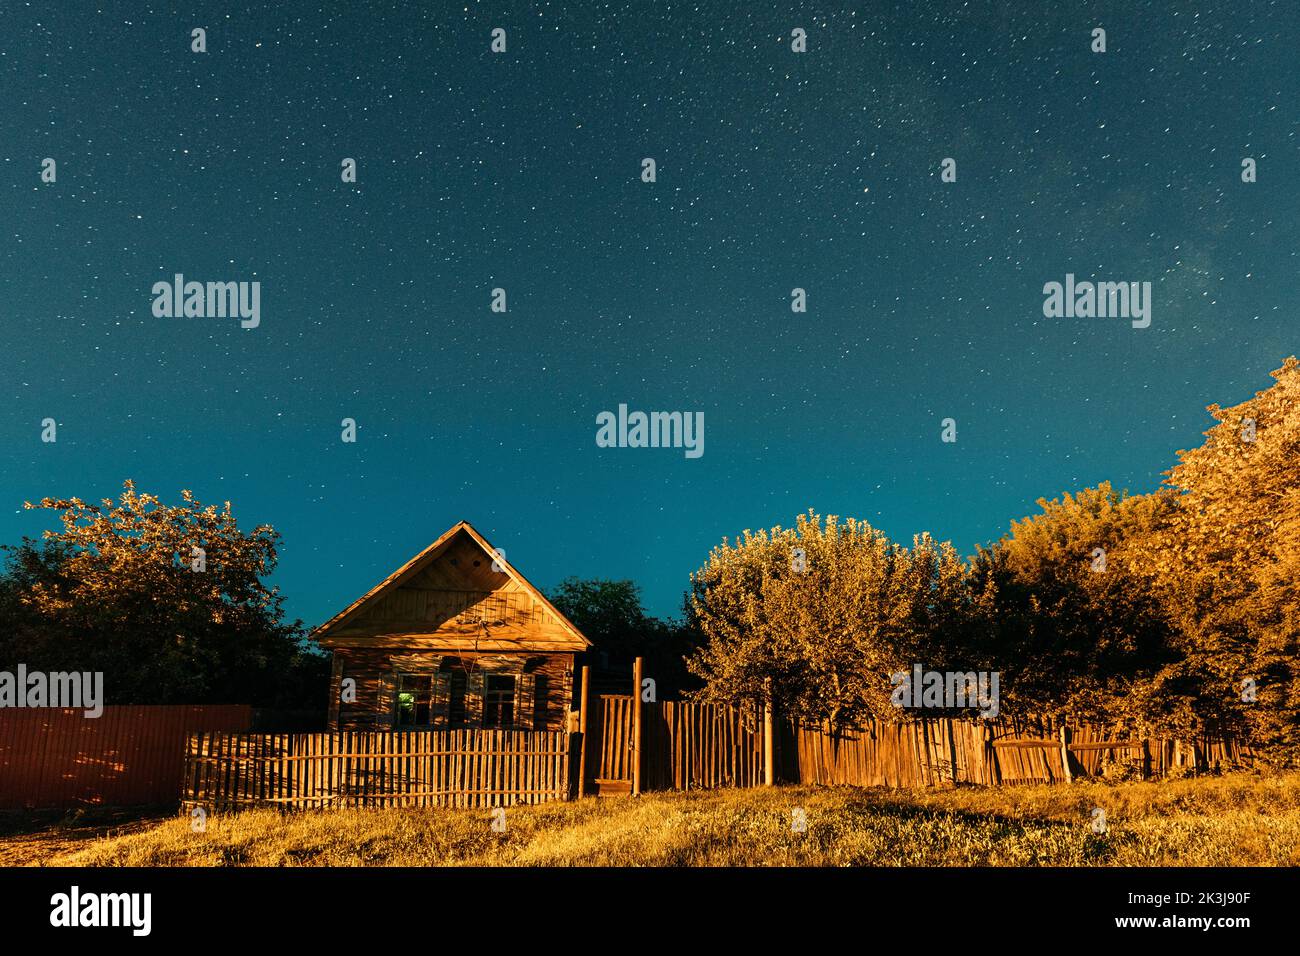 Night sky over house in old village. Night starry sky above house with bright stars and meteoric track trail. Glowing stars above summer nature Stock Photo